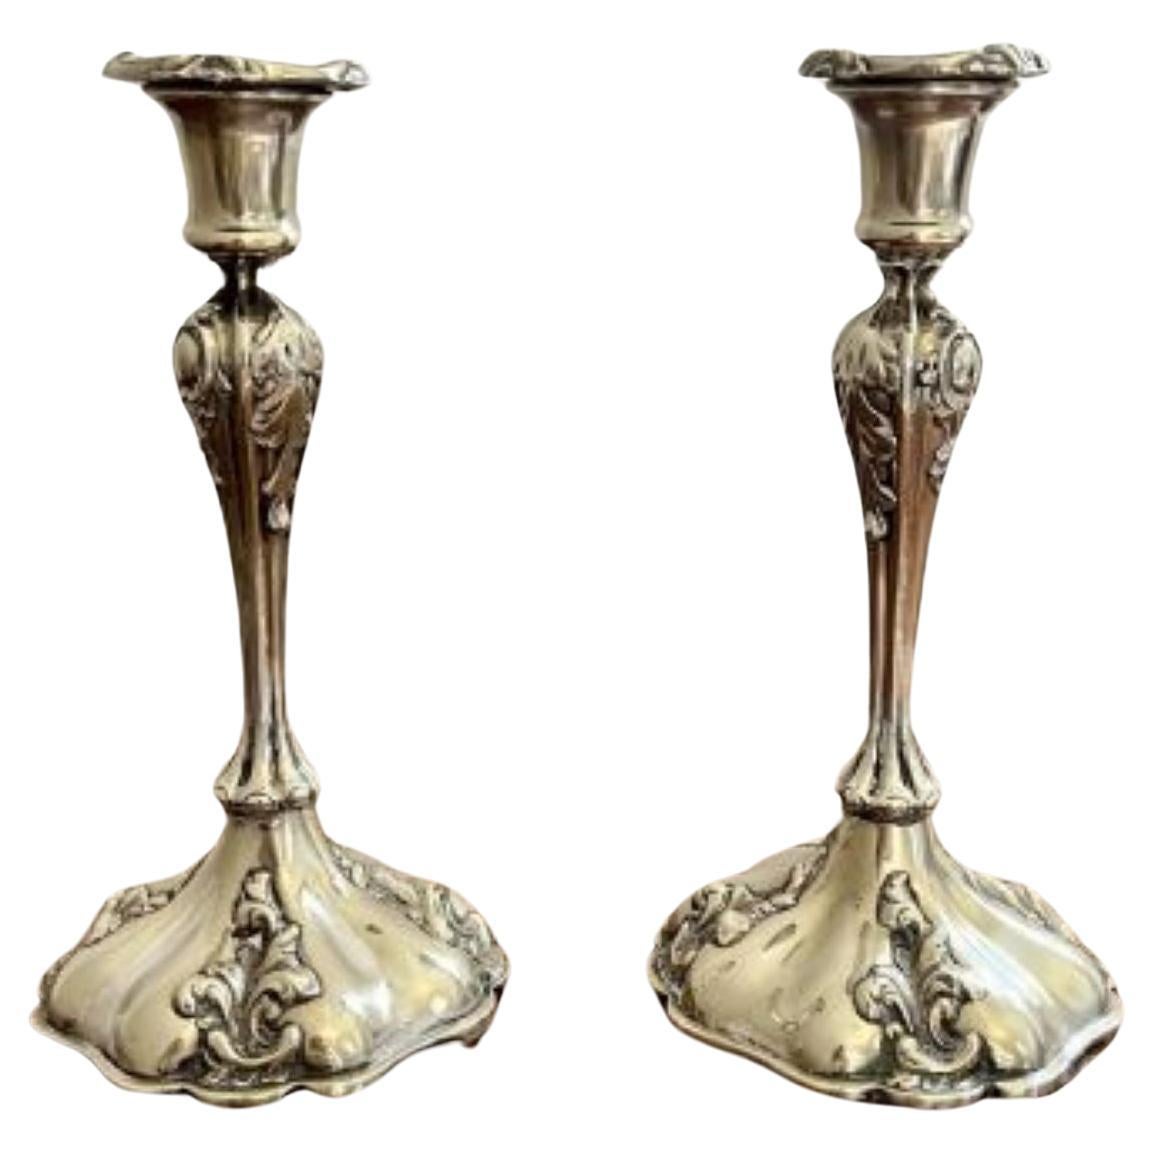 Quality pair of antique silver plated ornate candlesticks 